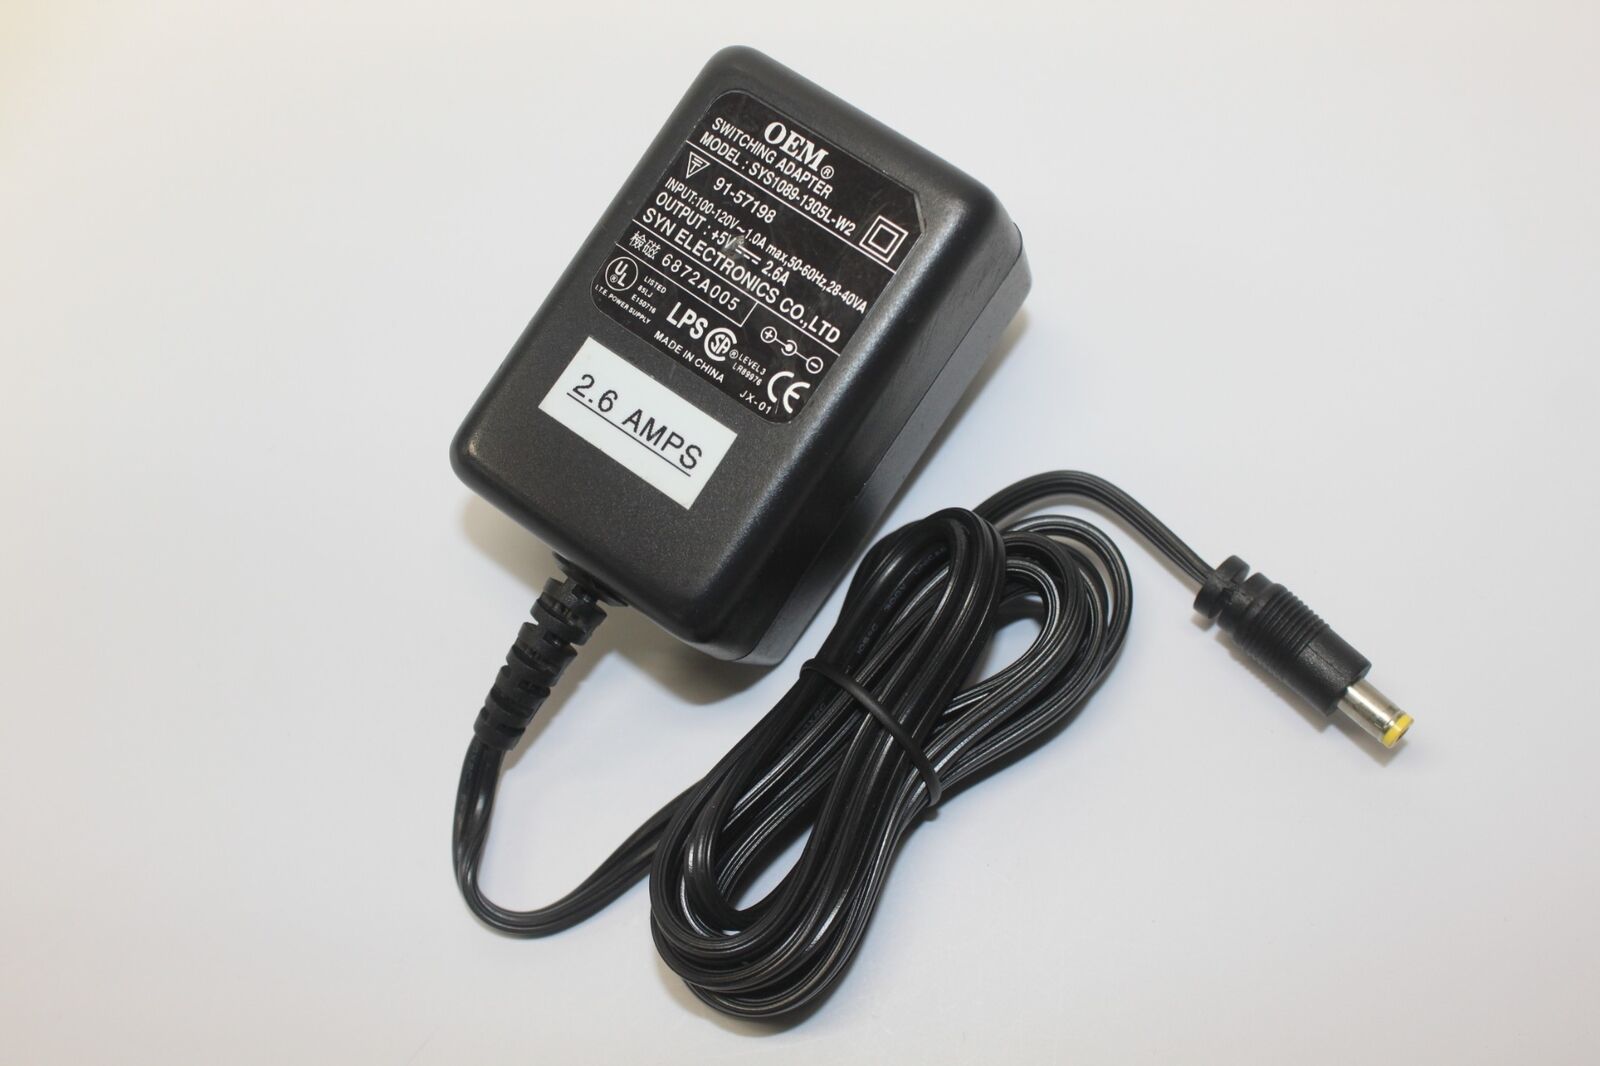 SYN OEM SYS1089-1305L-W2 Switching AC Adapter Power Supply Cord Charger DC 5V Brand: SYN Type: Adapter MPN: Does